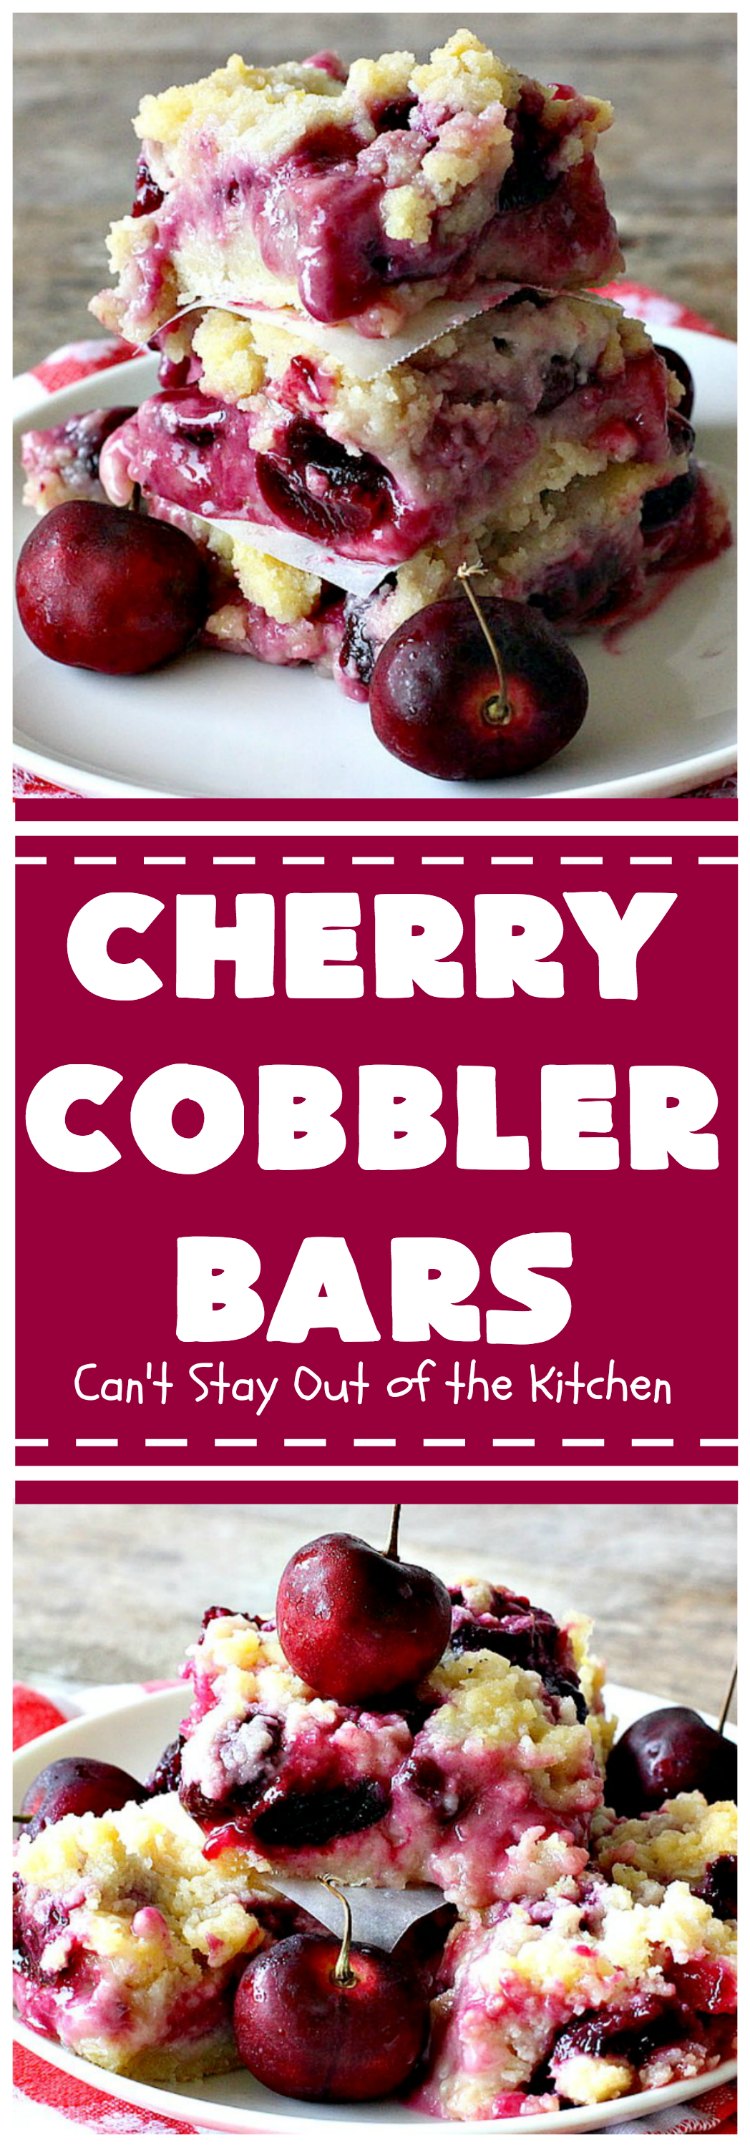 Cherry Cobbler Bars | Can't Stay Out of the Kitchen